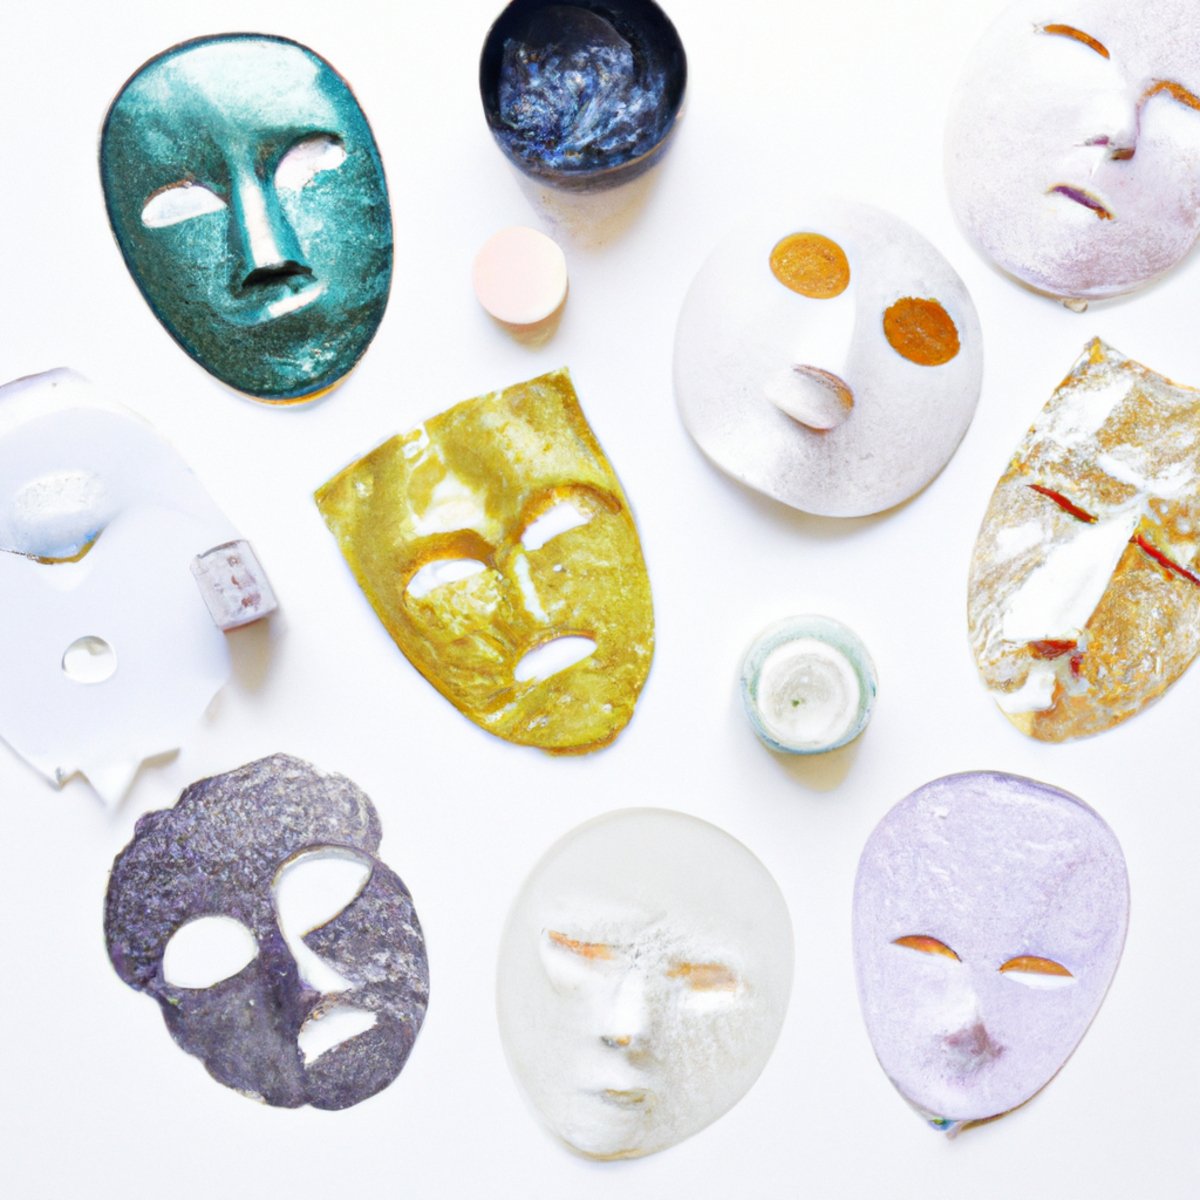 Assorted face masks in vibrant colors and textures, displayed elegantly on a white background, promoting multi-masking for radiant skin.